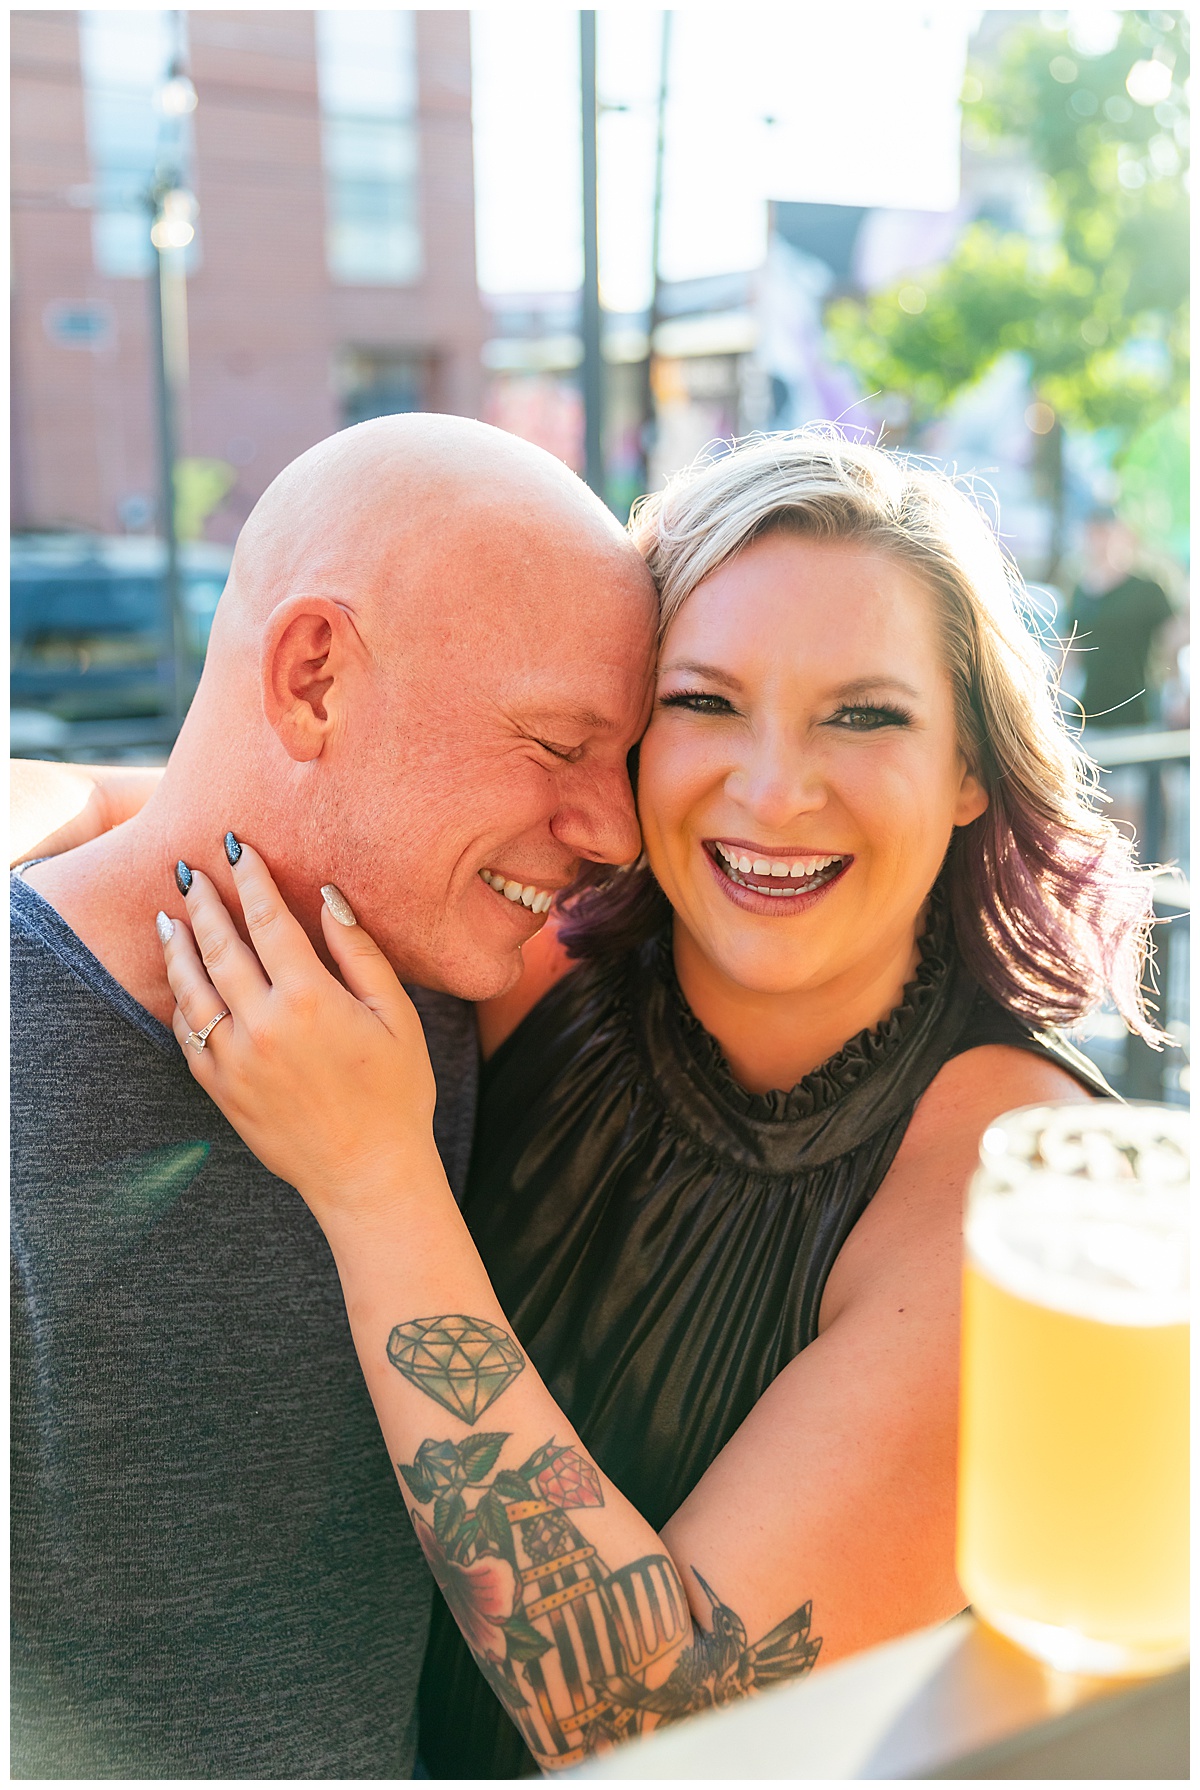 A woman with blonde hair dark silver dress and a bald man in a blue sweater pose with beers at their brewery engagement session